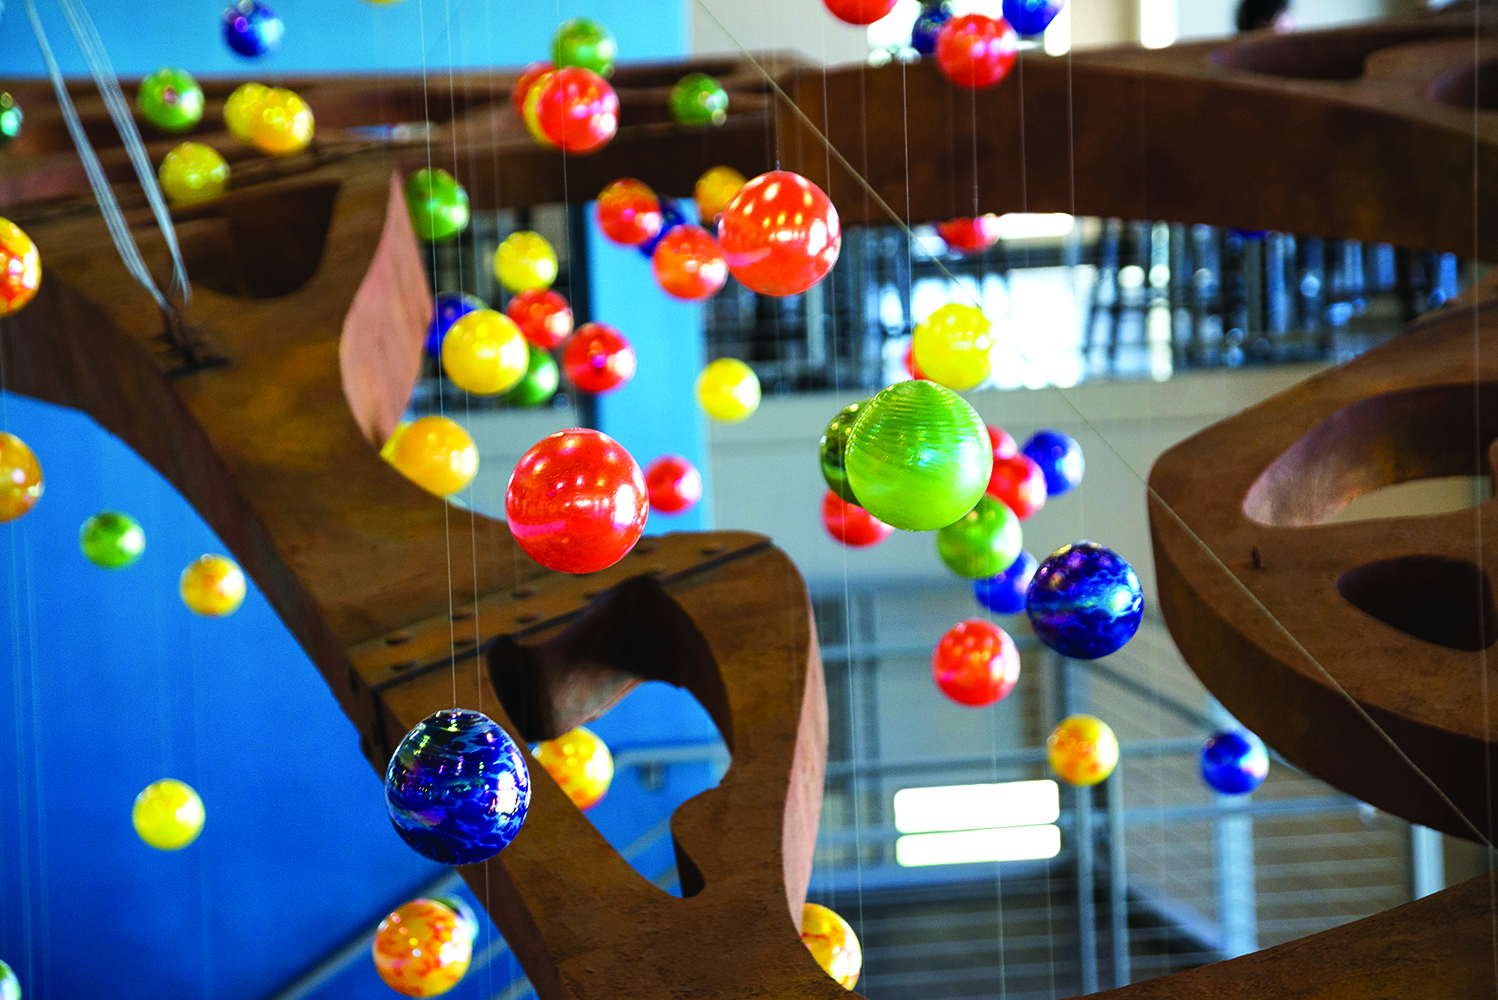 Glass spheres used in Transitions suspended sculpture, texas tech at lubbock